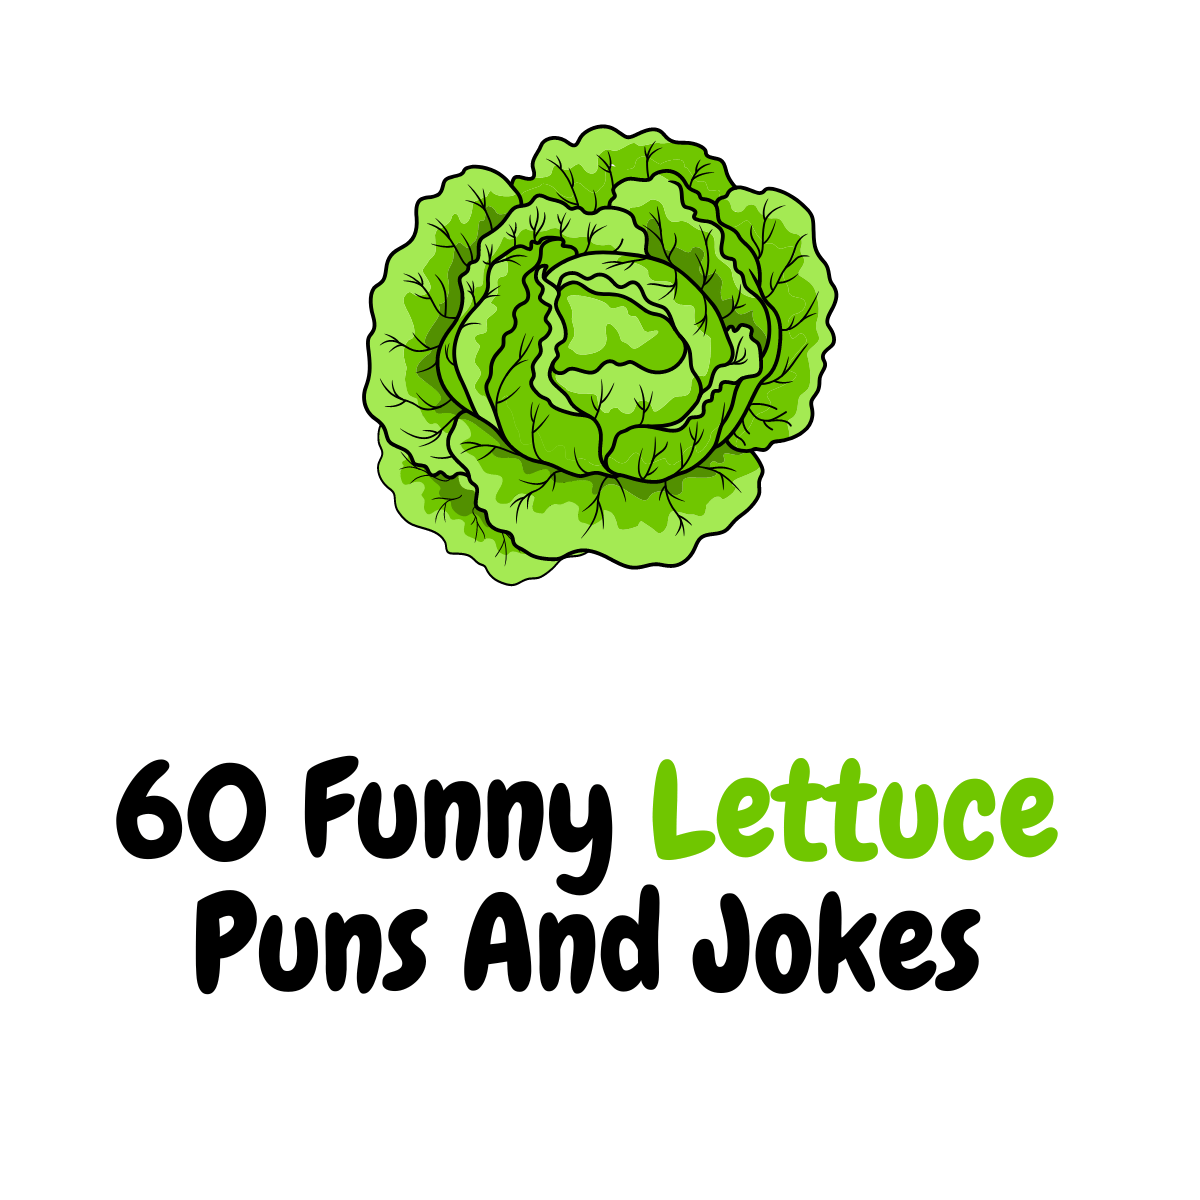 60+ Funny Lettuce Puns And Jokes: Romaine to be Funny